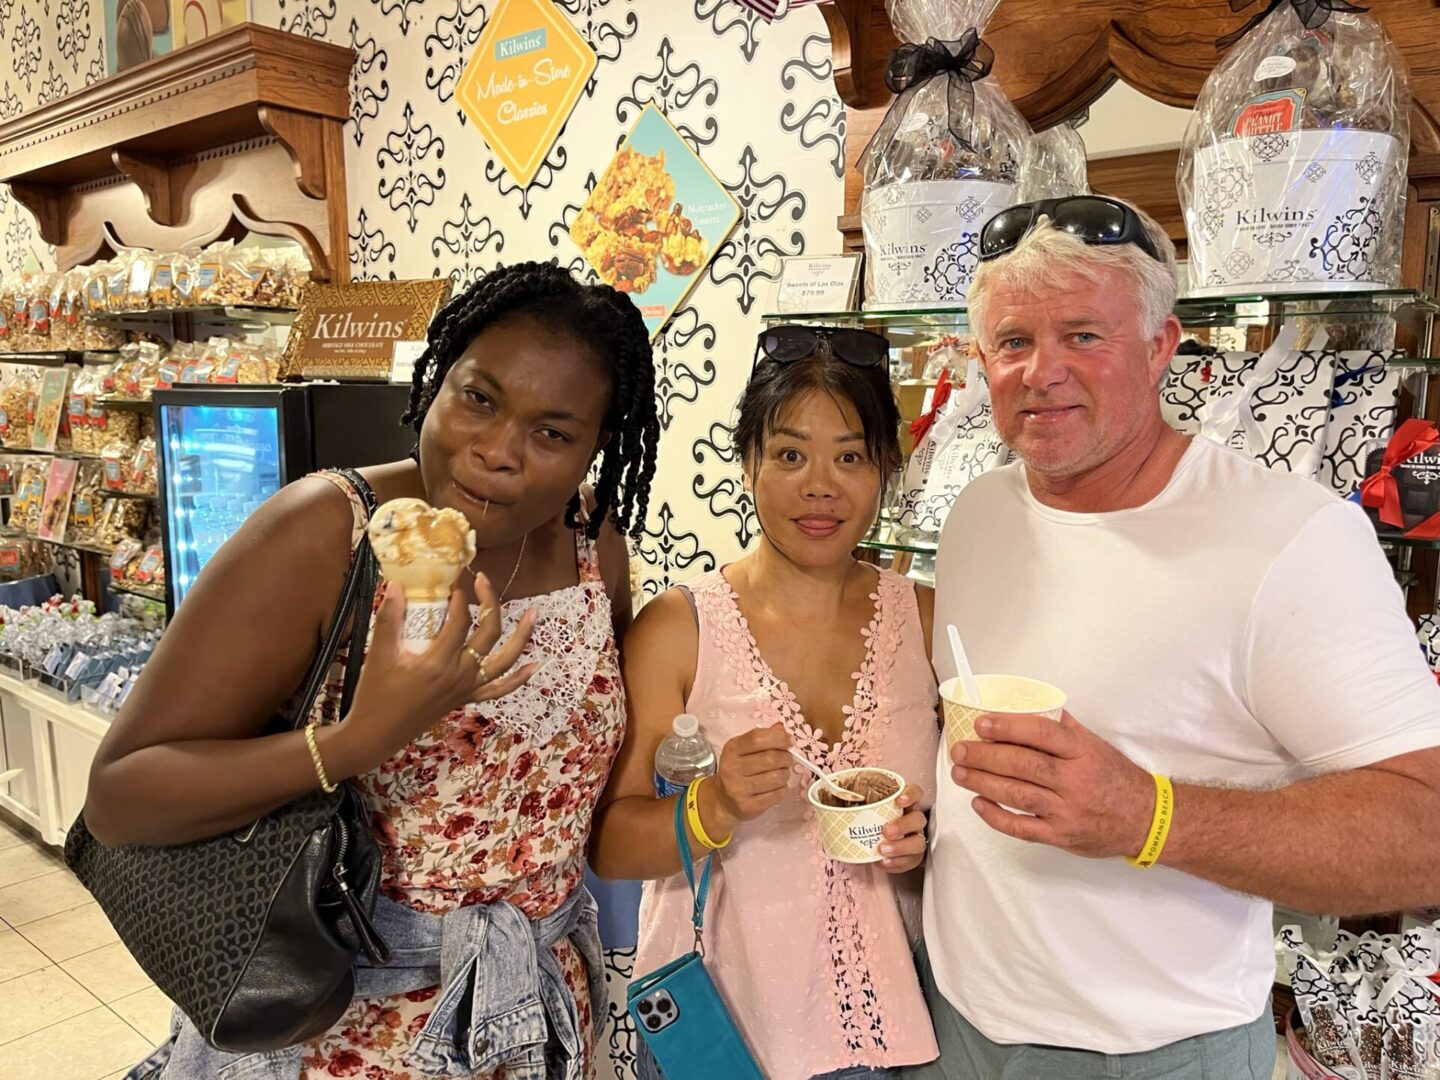 A Man With two Women With Gelato Cups in Hand